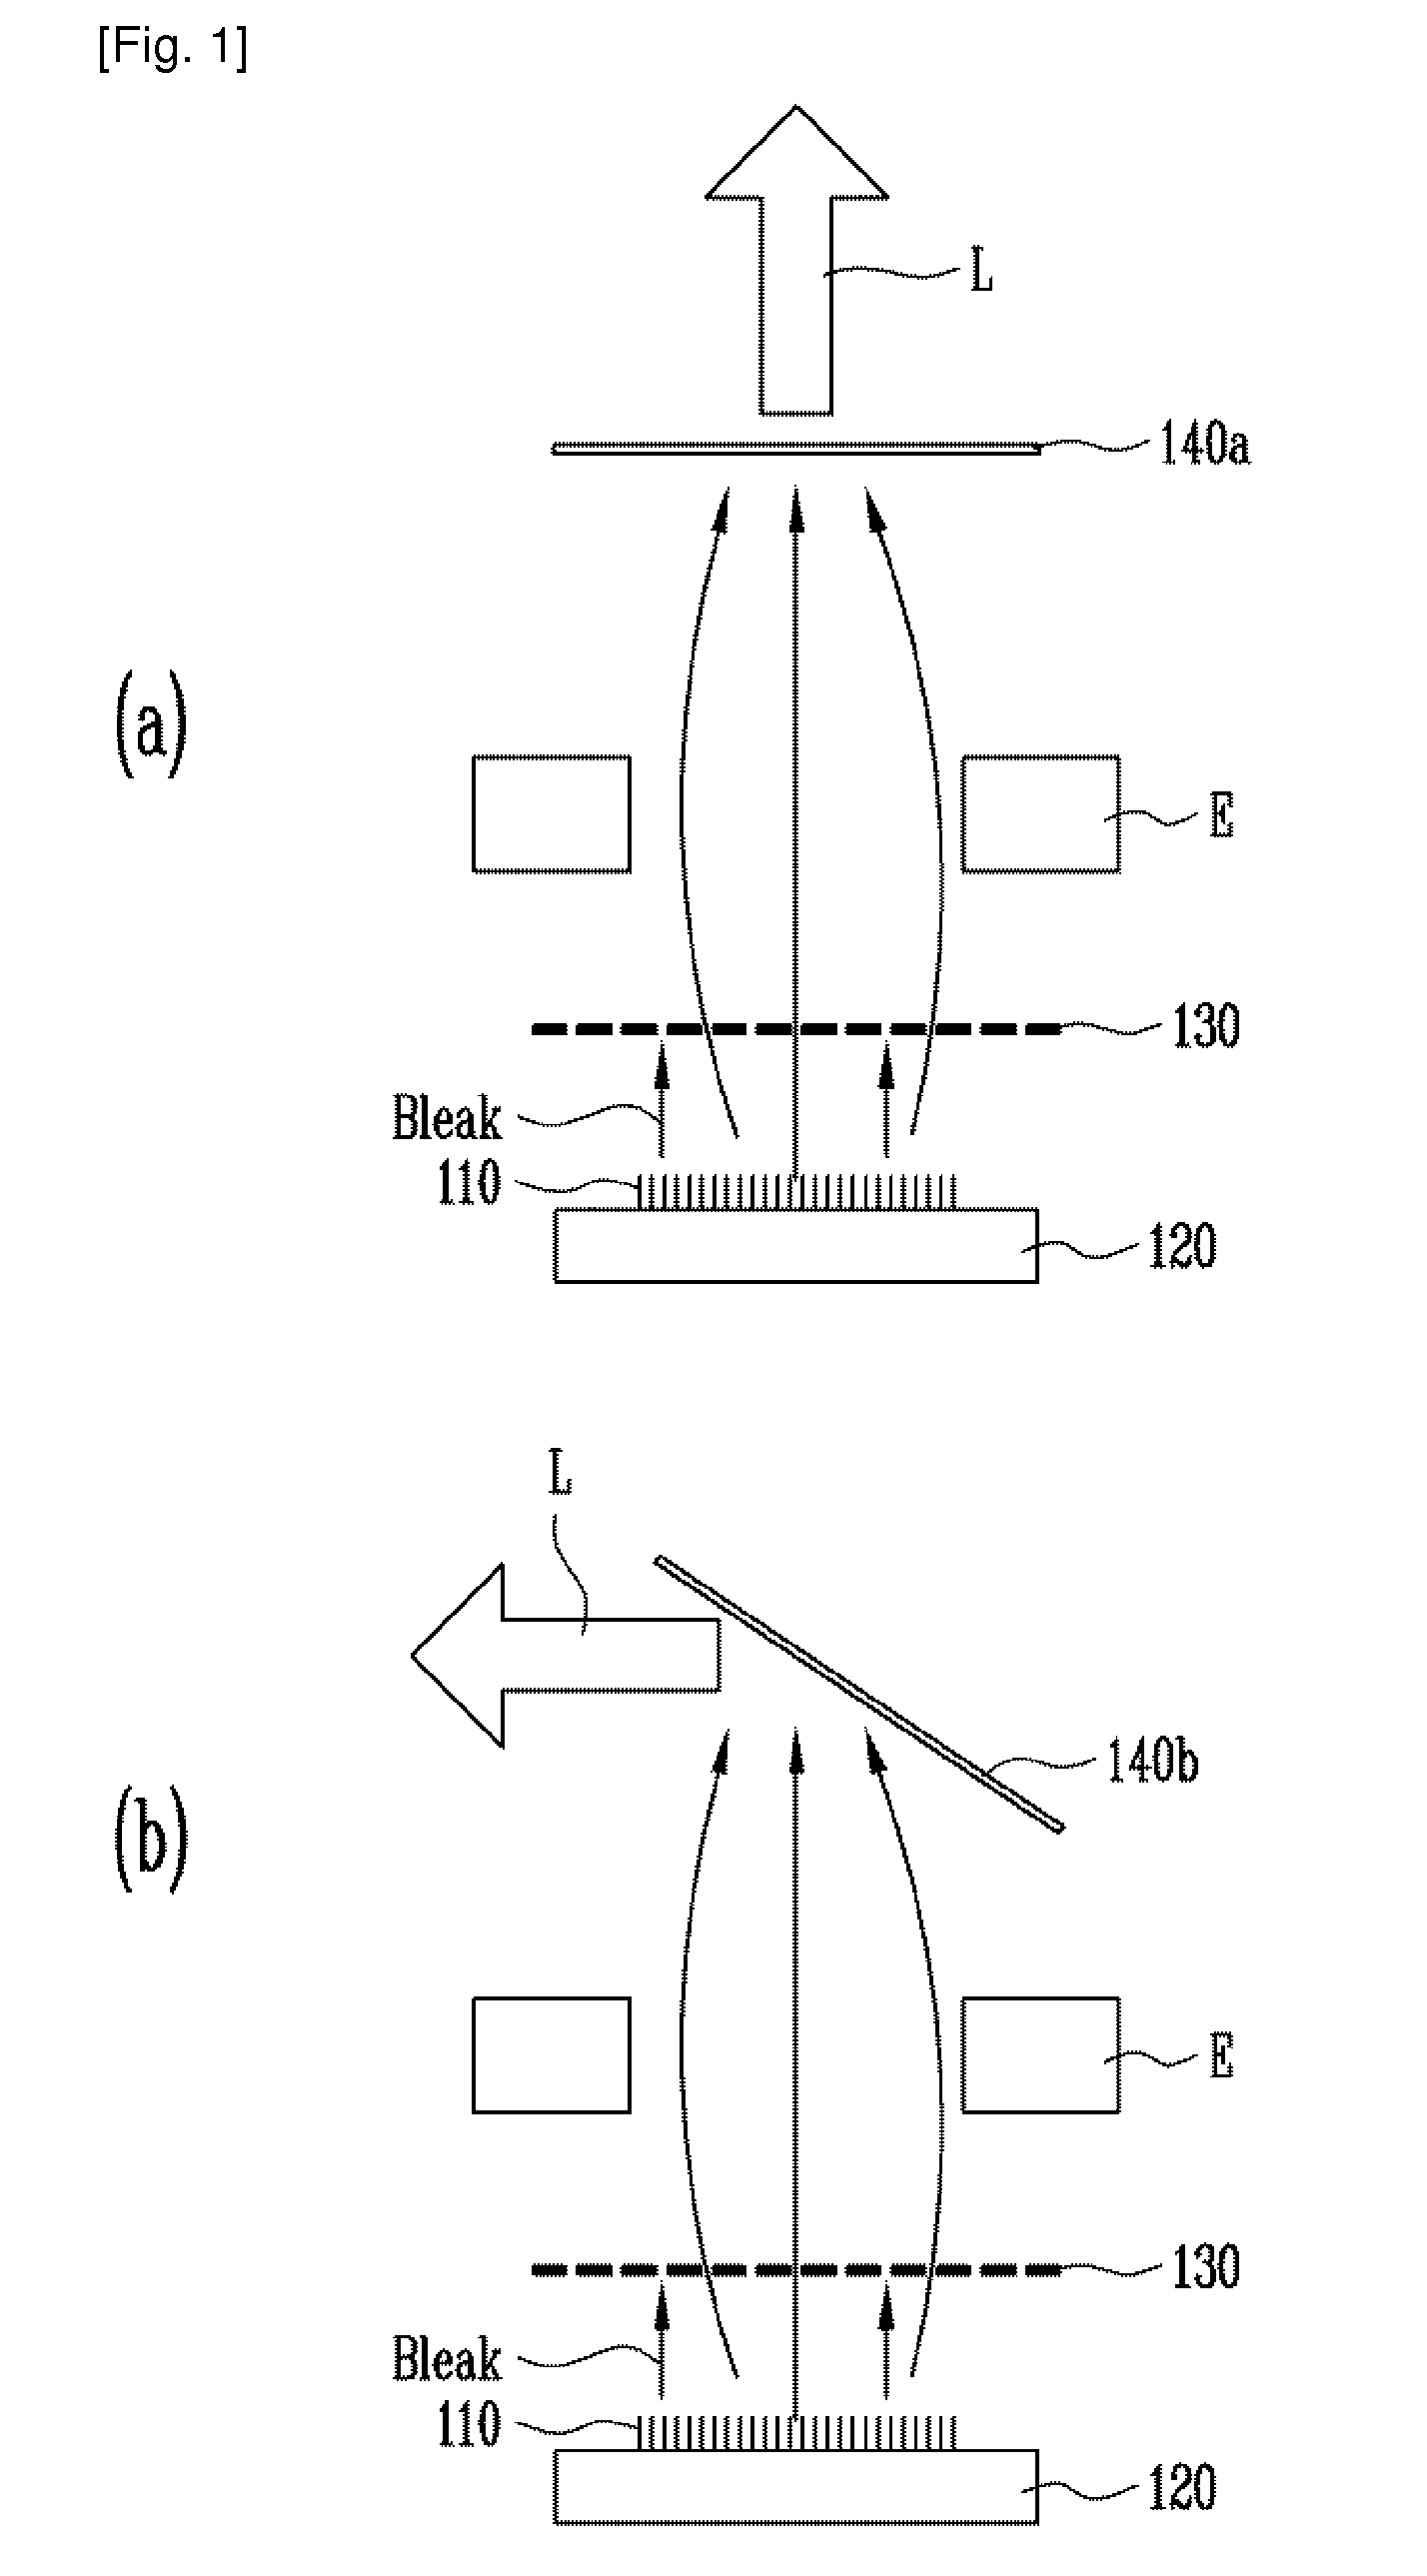 Microminiature x-ray tube with triode structure using a NANO emitter